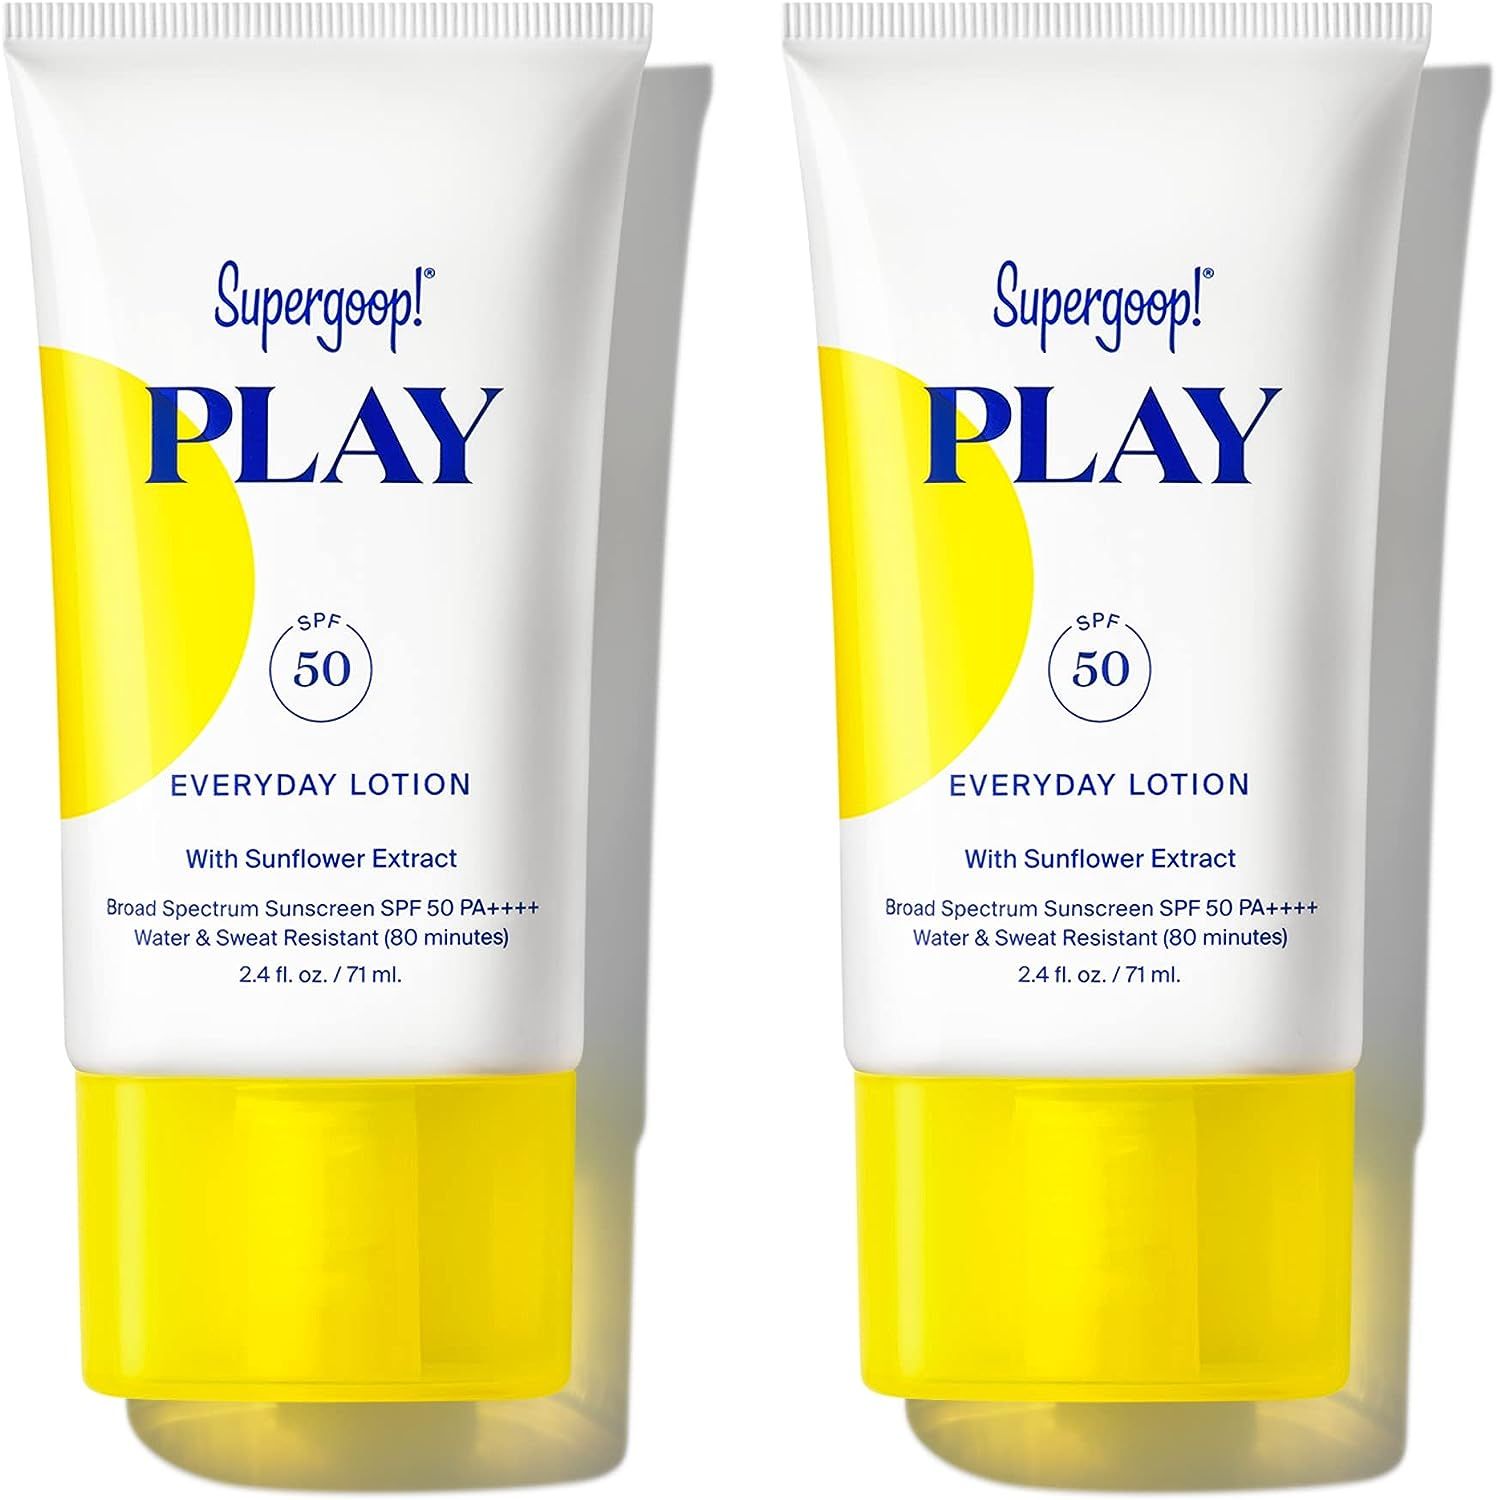 Supergoop! PLAY Everyday SPF 50 Lotion, 2.4 fl oz - 2 Pack - Reef-Friendly, Broad Spectrum Sunscreen | Amazon (US)